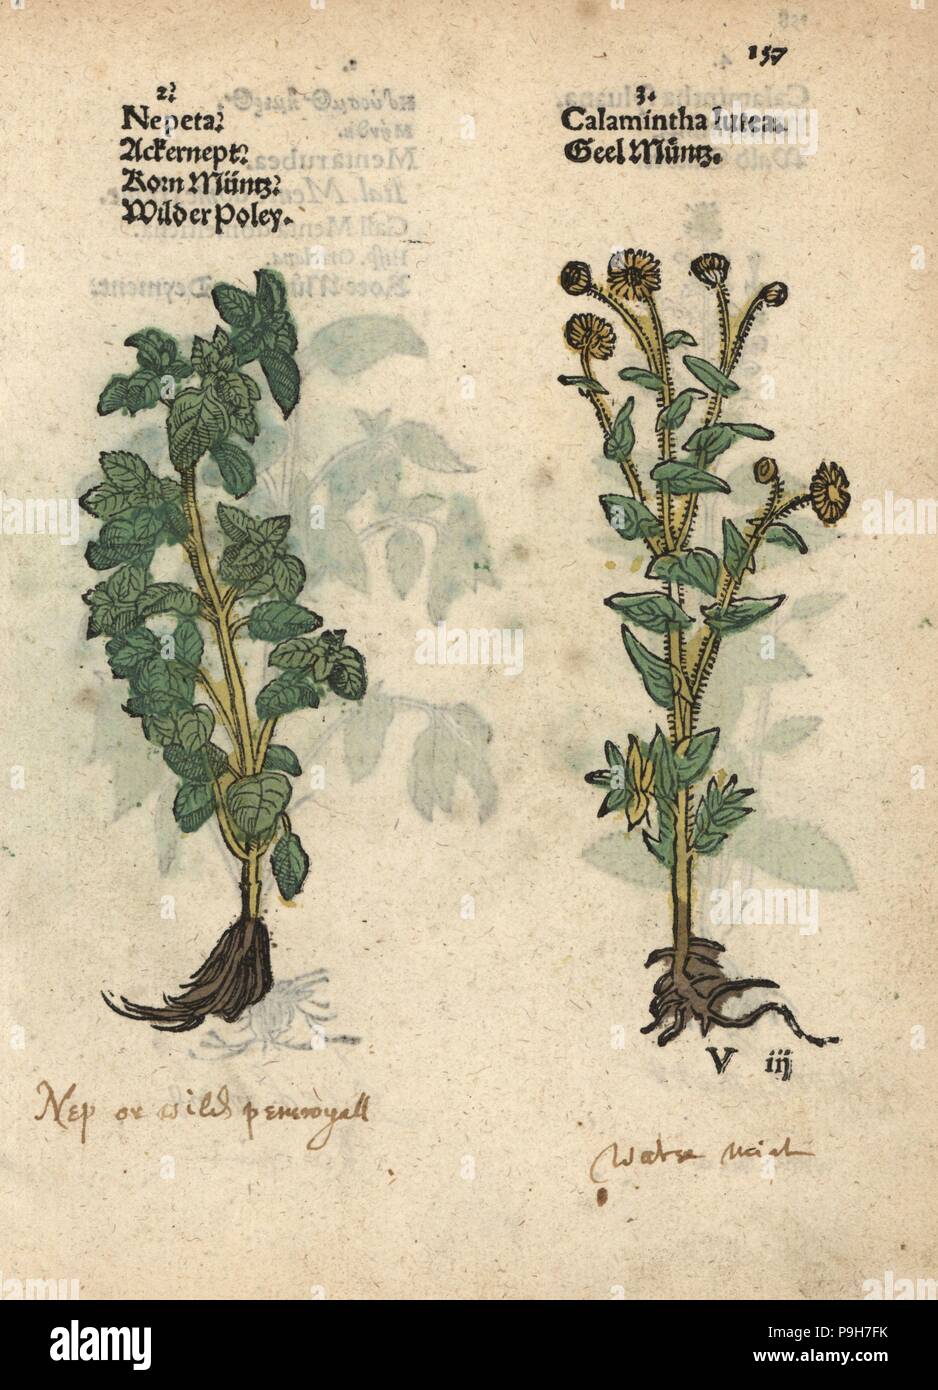 Lesser calamint, Calamintha nepeta, and yellow calamint, Calamintha lutea. Handcoloured woodblock engraving of a botanical illustration from Adam Lonicer's Krauterbuch, or Herbal, Frankfurt, 1557. This from a 17th century pirate edition or atlas of illustrations only, with captions in Latin, Greek, French, Italian, German, and in English manuscript. Stock Photo